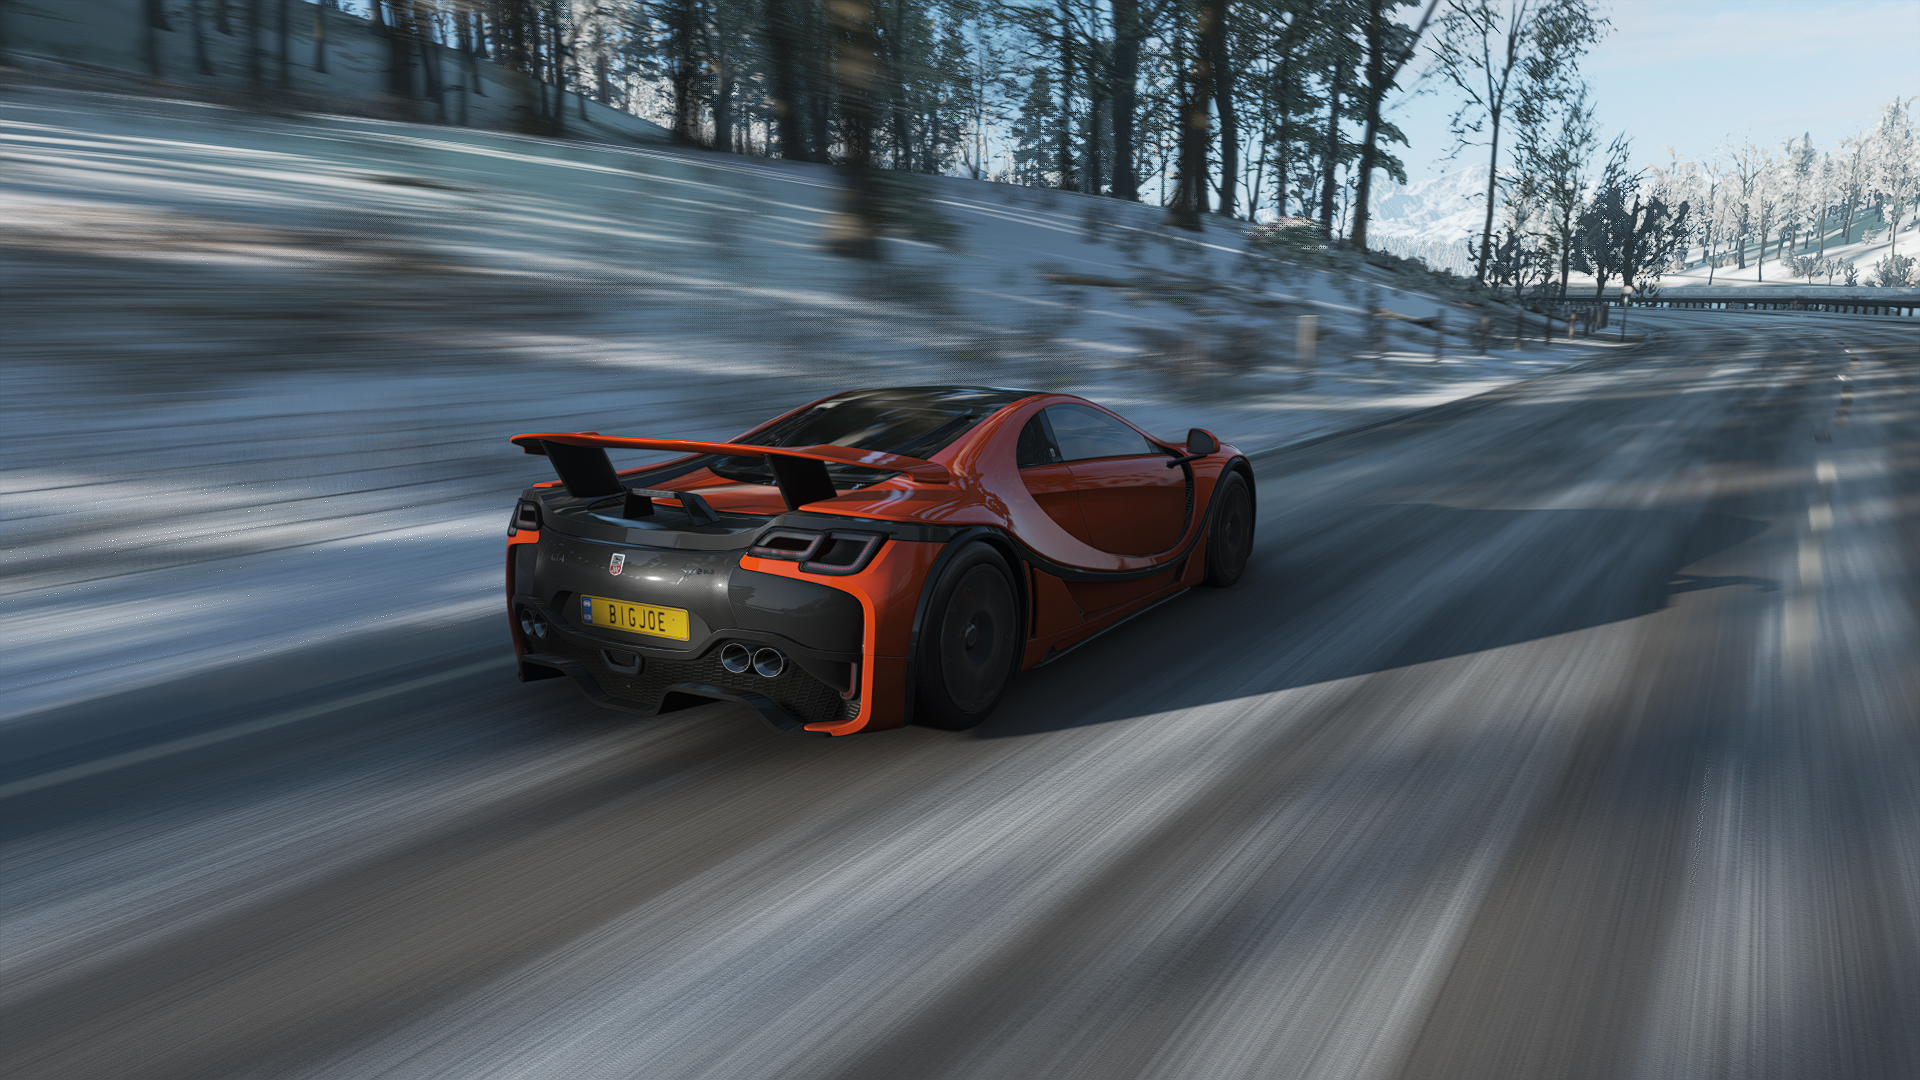 General 1920x1080 Forza Horizon 4 Forza Horizon Forza car driving CGI GTA Spano video games vehicle rear view road licence plates blurred blurry background trees PlaygroundGames